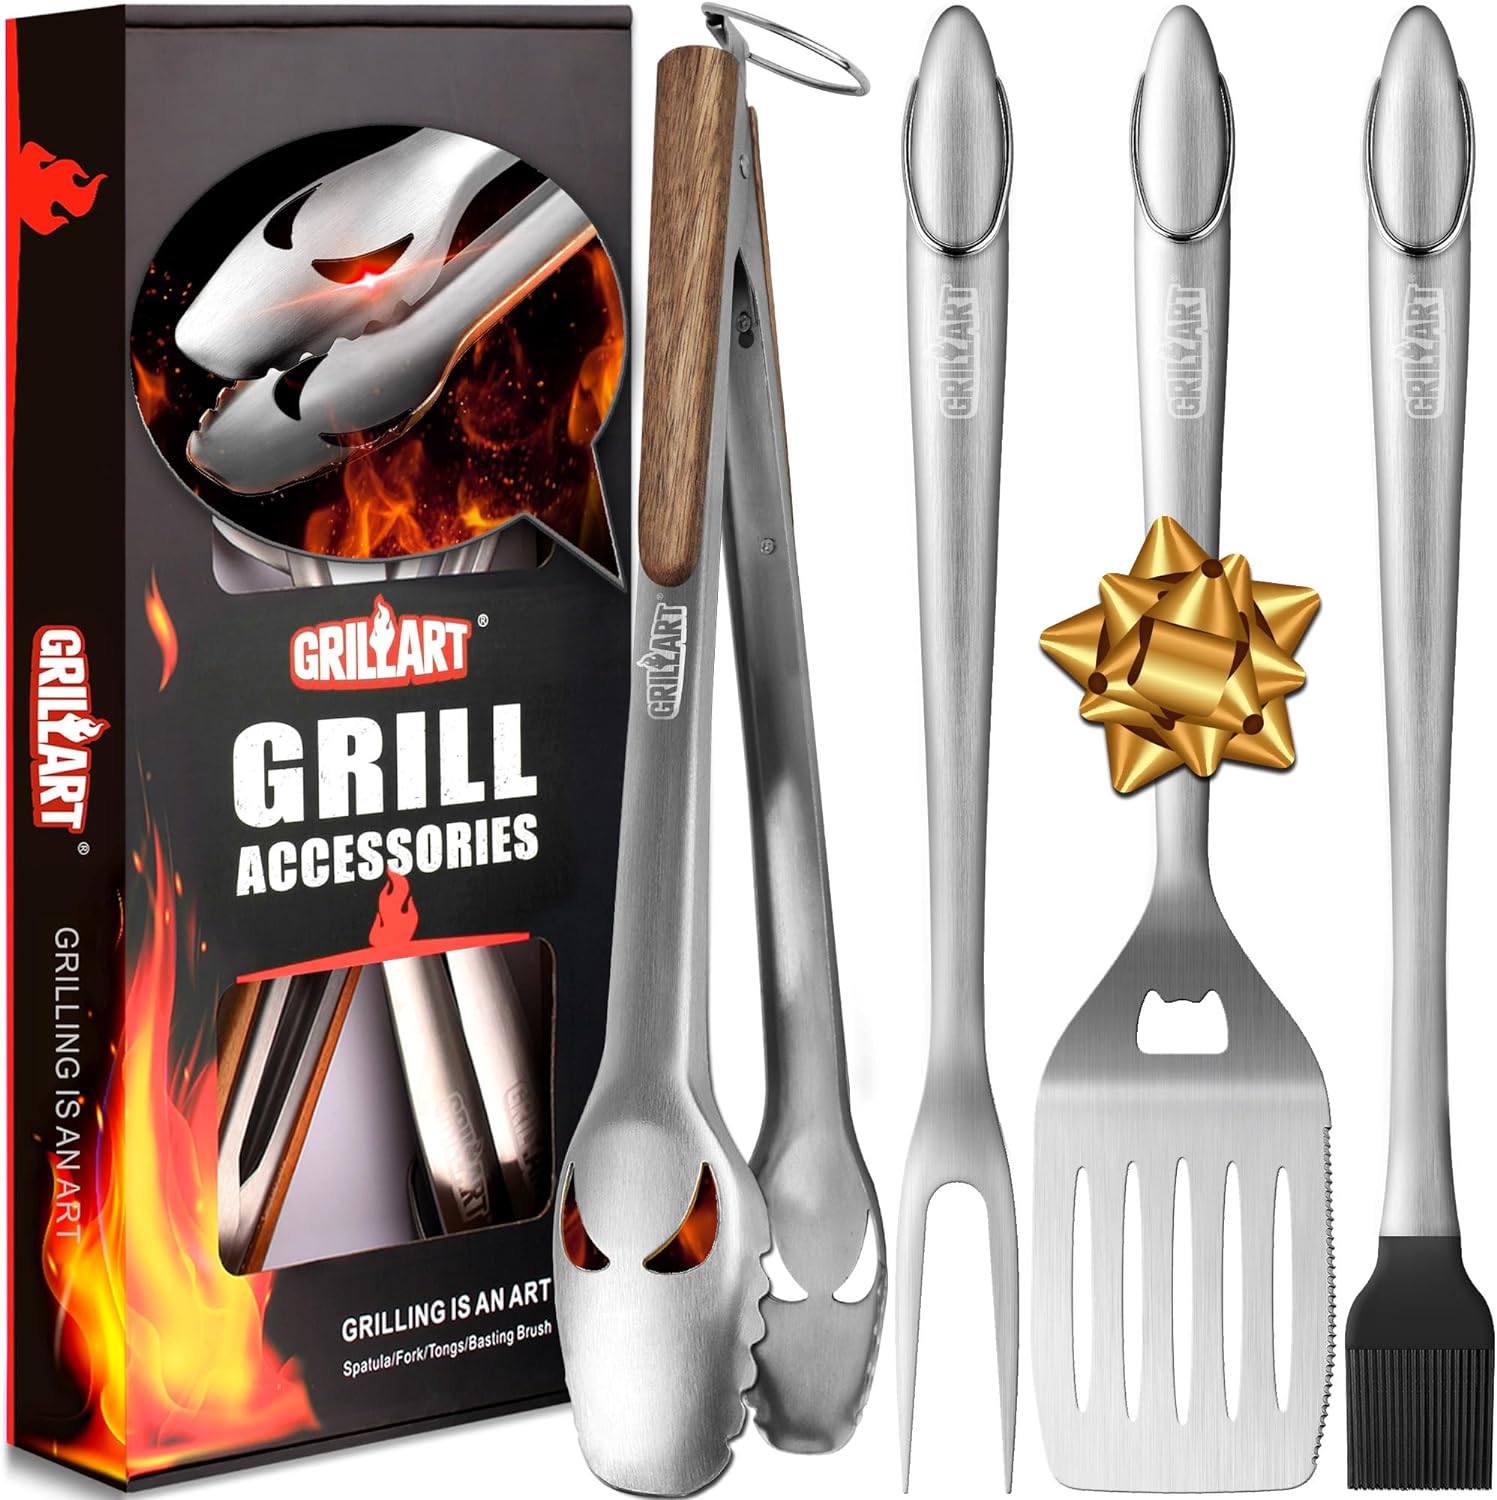 5 best barbecue tool sets in 2024